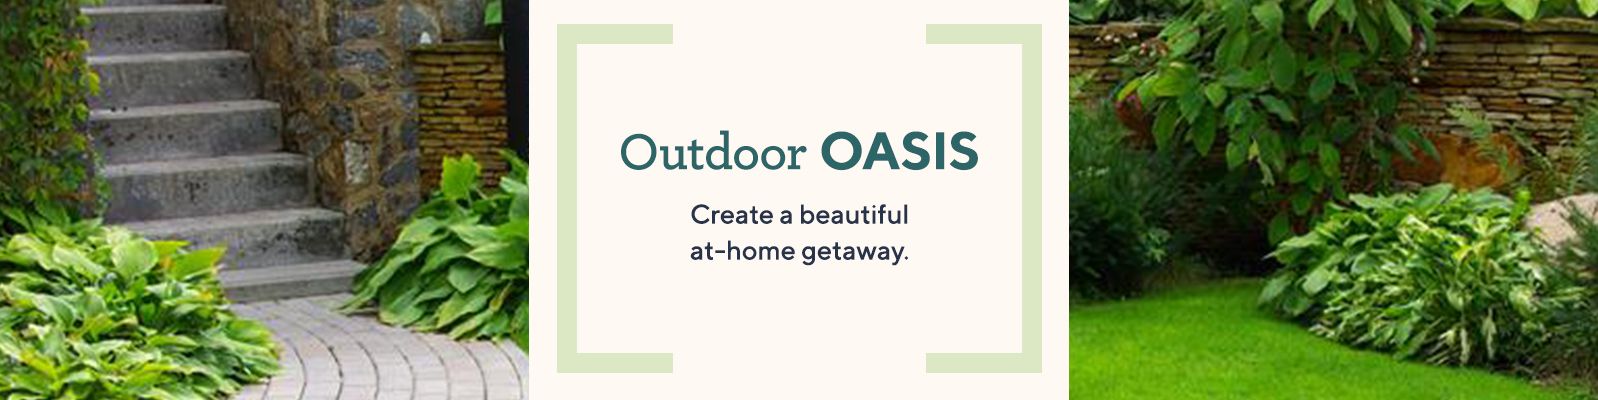 Outdoor Oasis.  Create a beautiful at-home getaway.